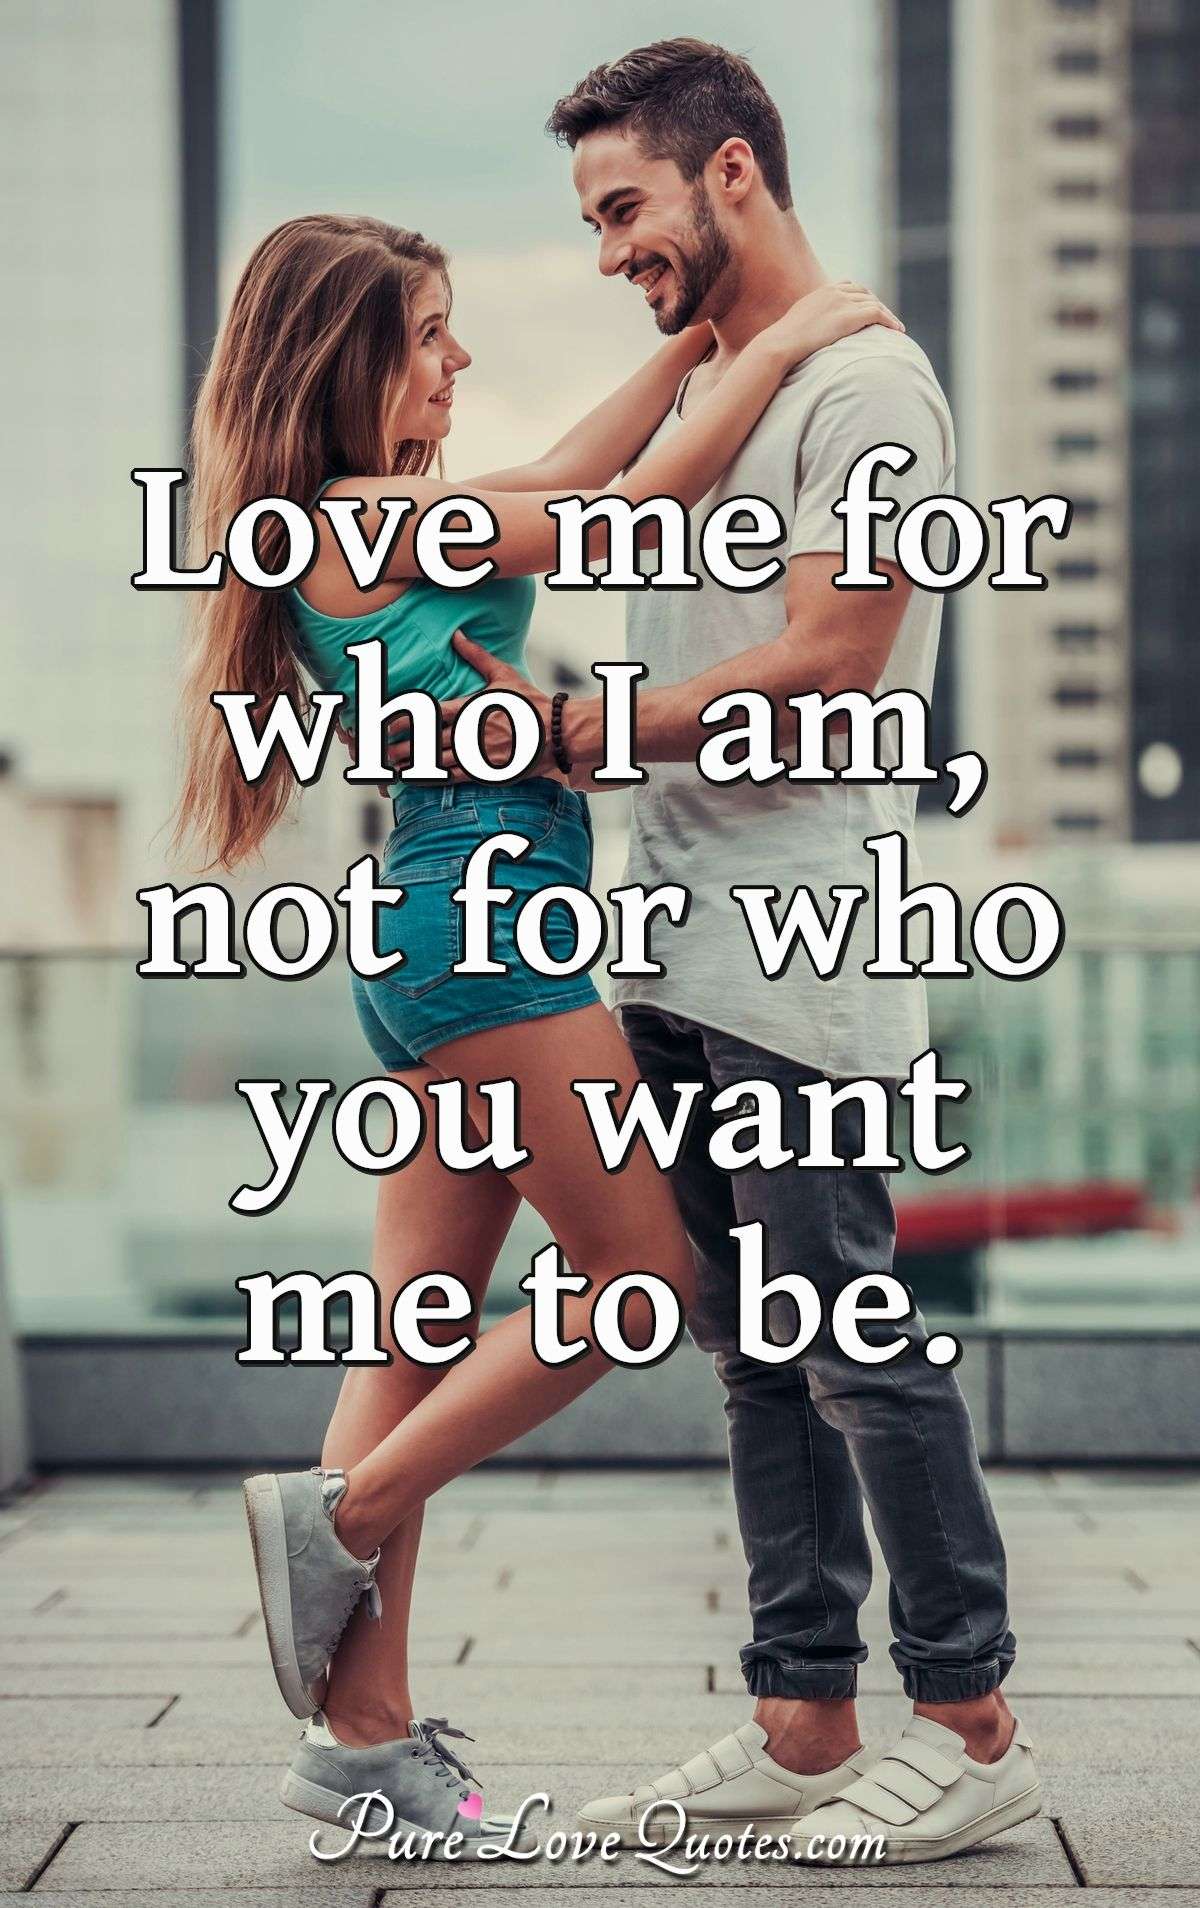 Love me for who I am, not for who you want me to be.